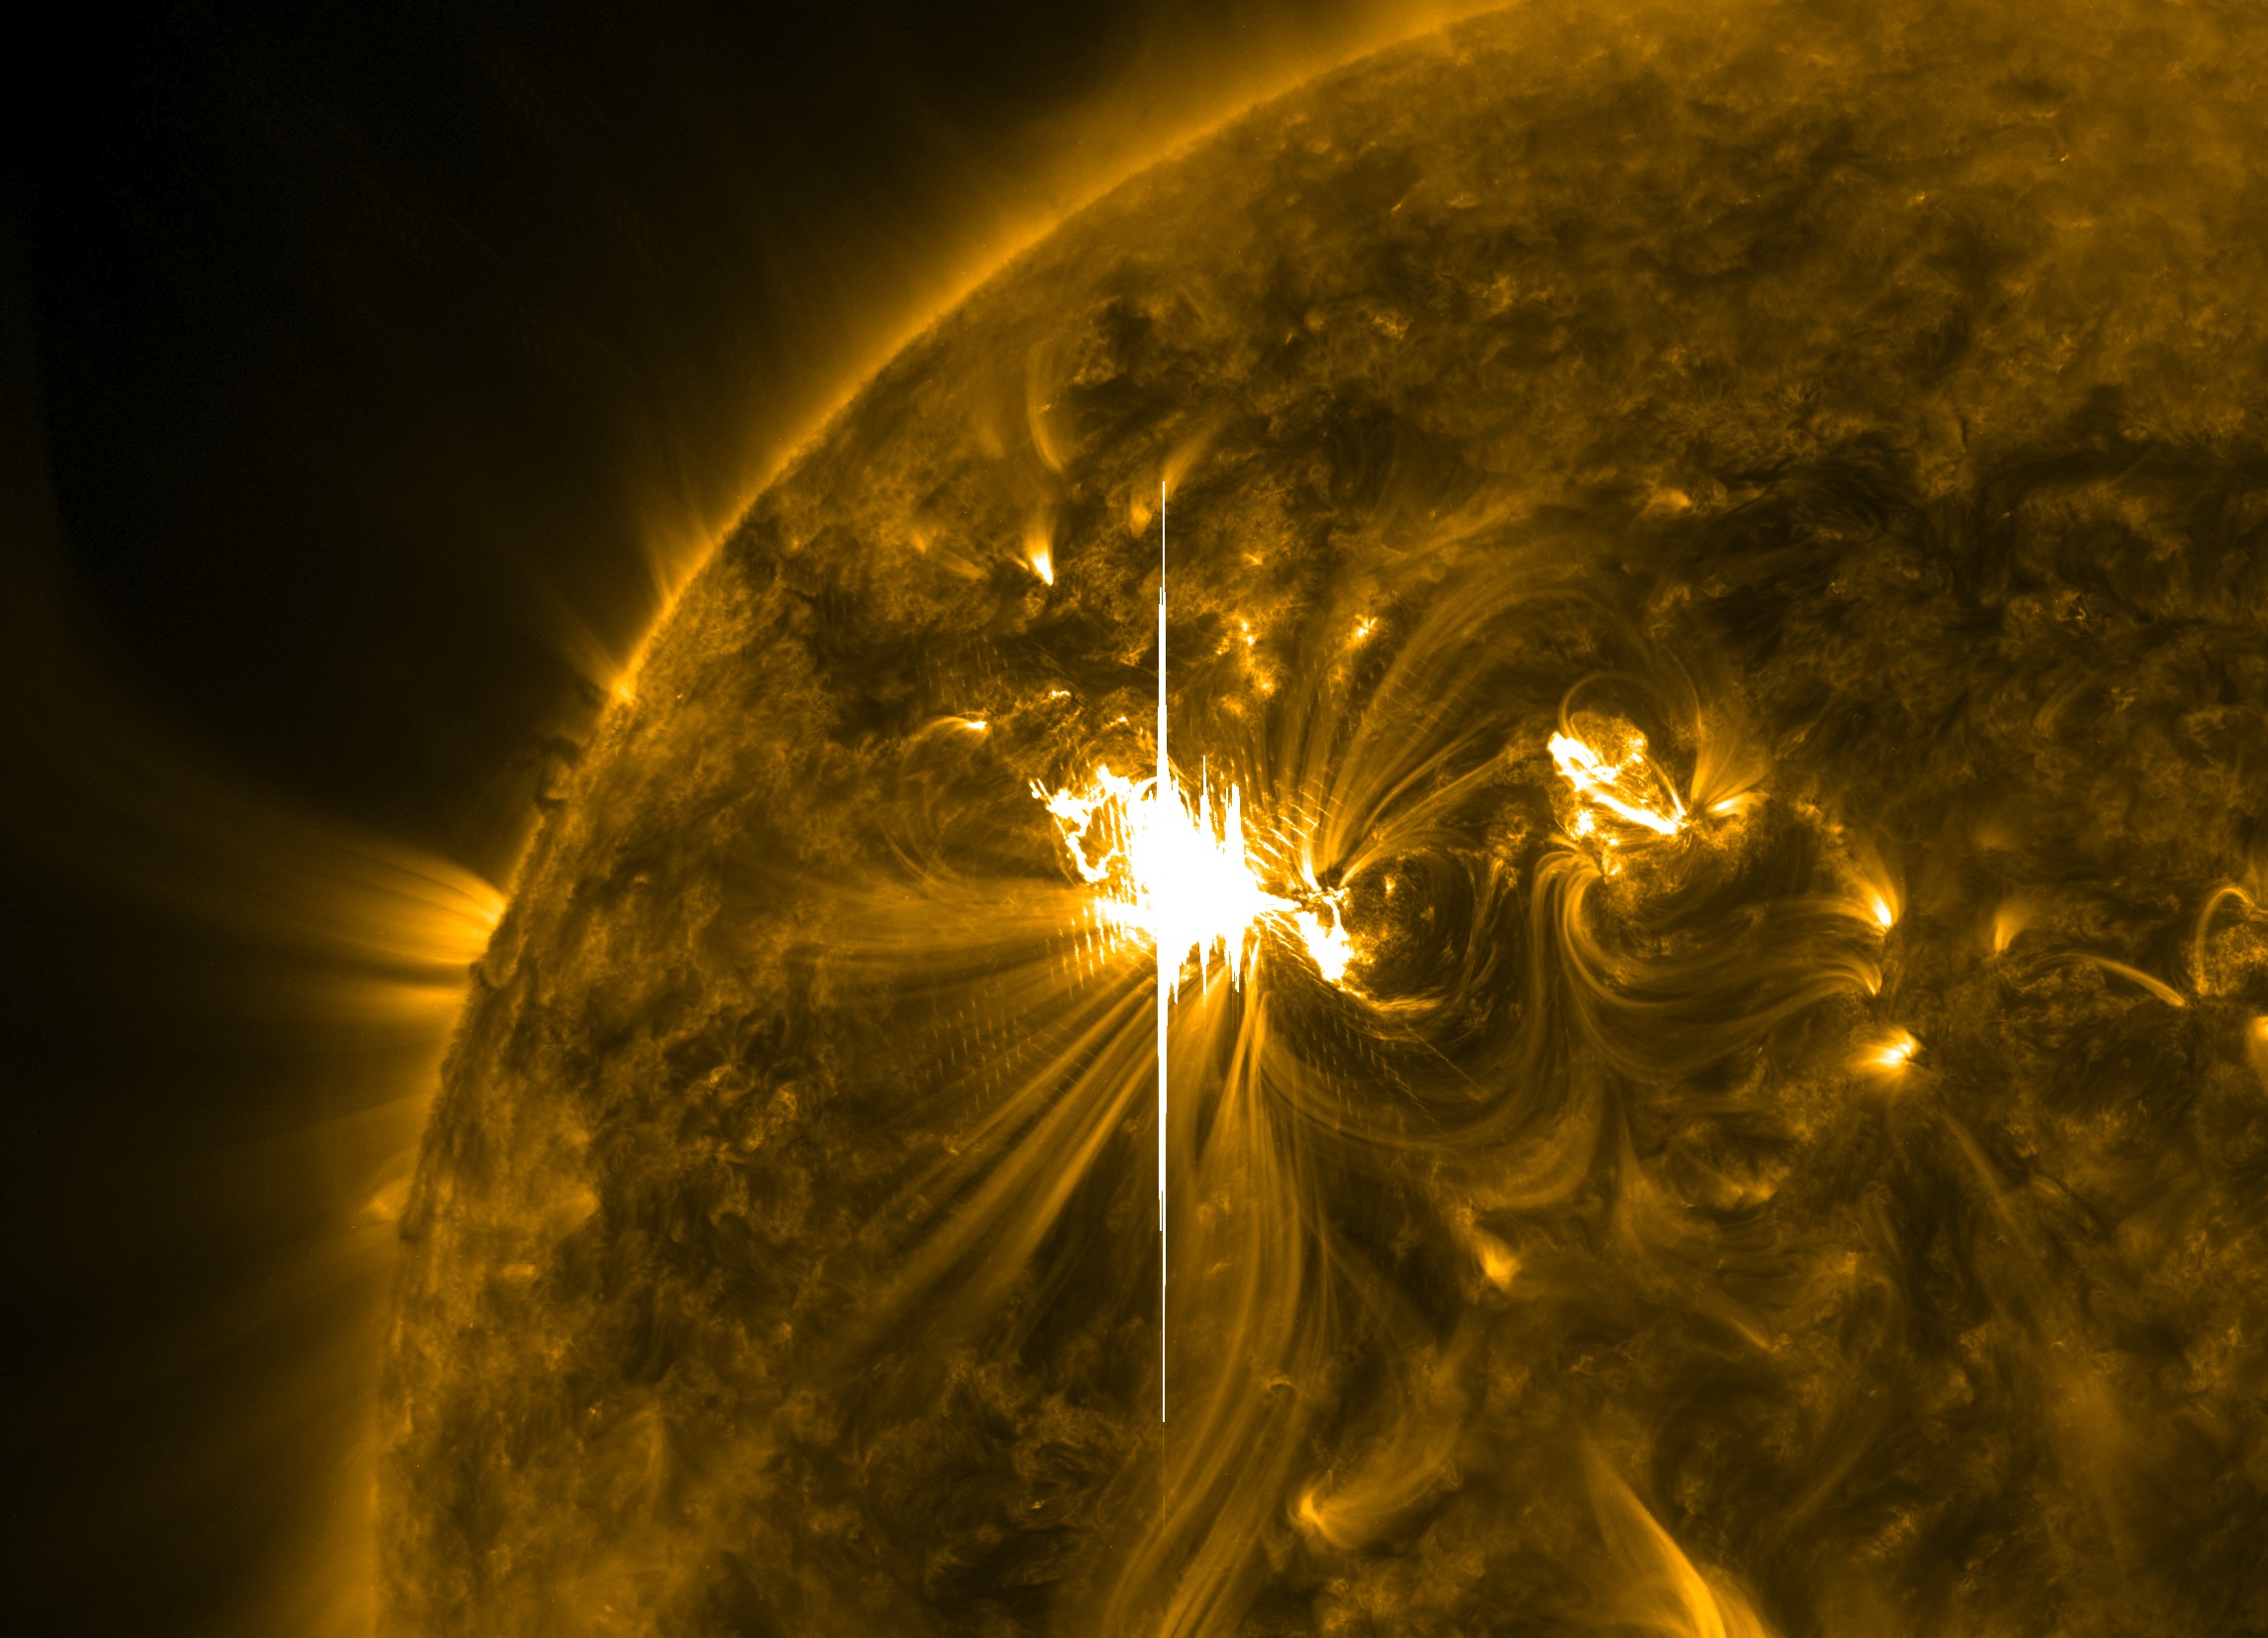 March 7, 2012 X5.4 flare in 171 angstrom extreme ultraviolet light.